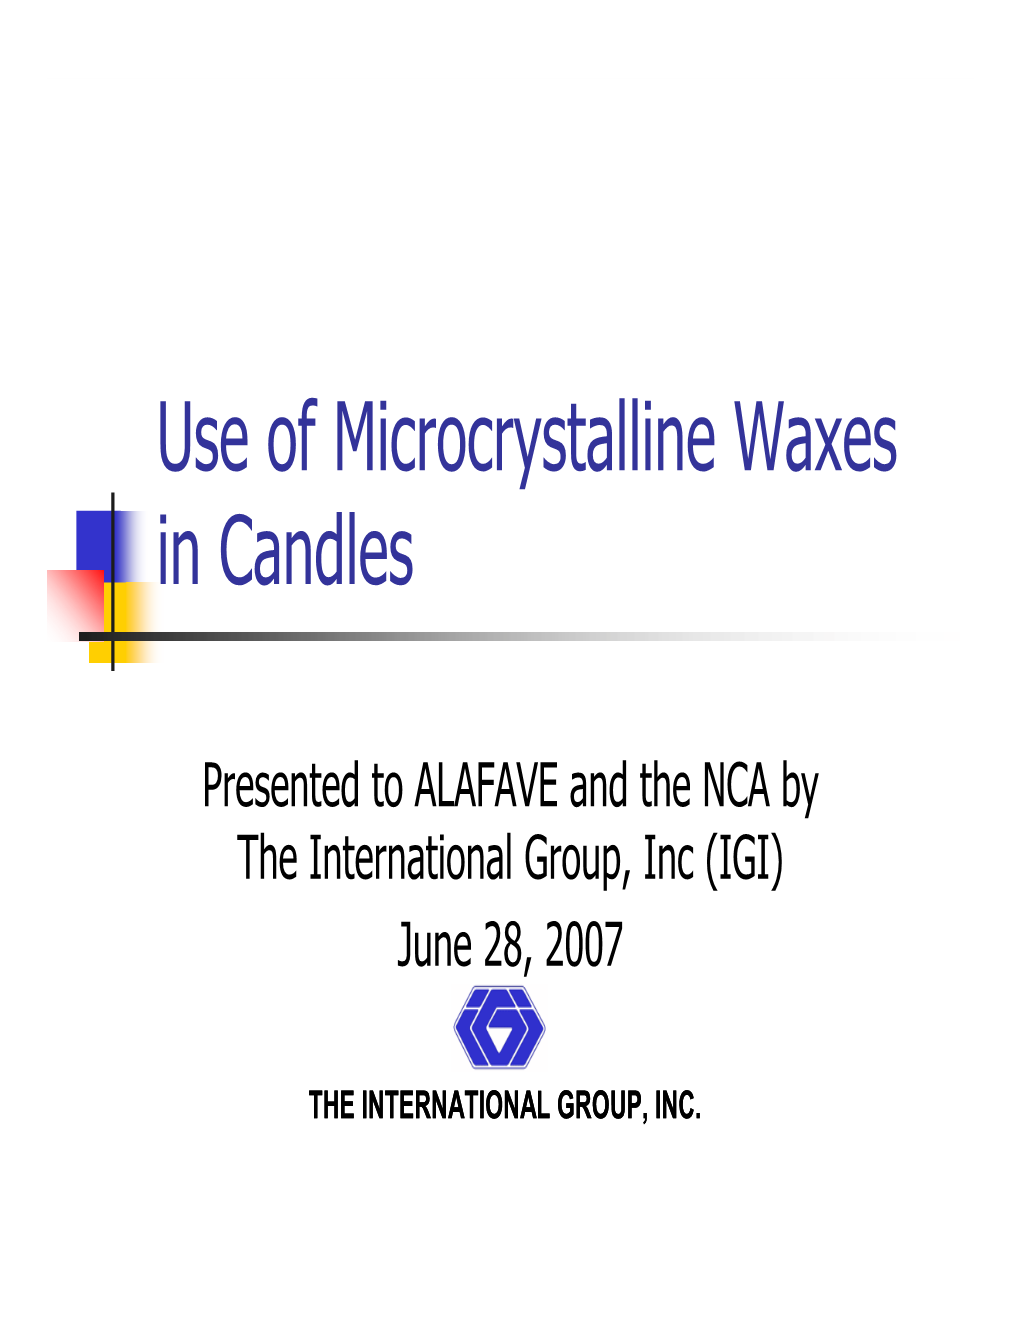 Use of Microcrystalline Waxes in Candles